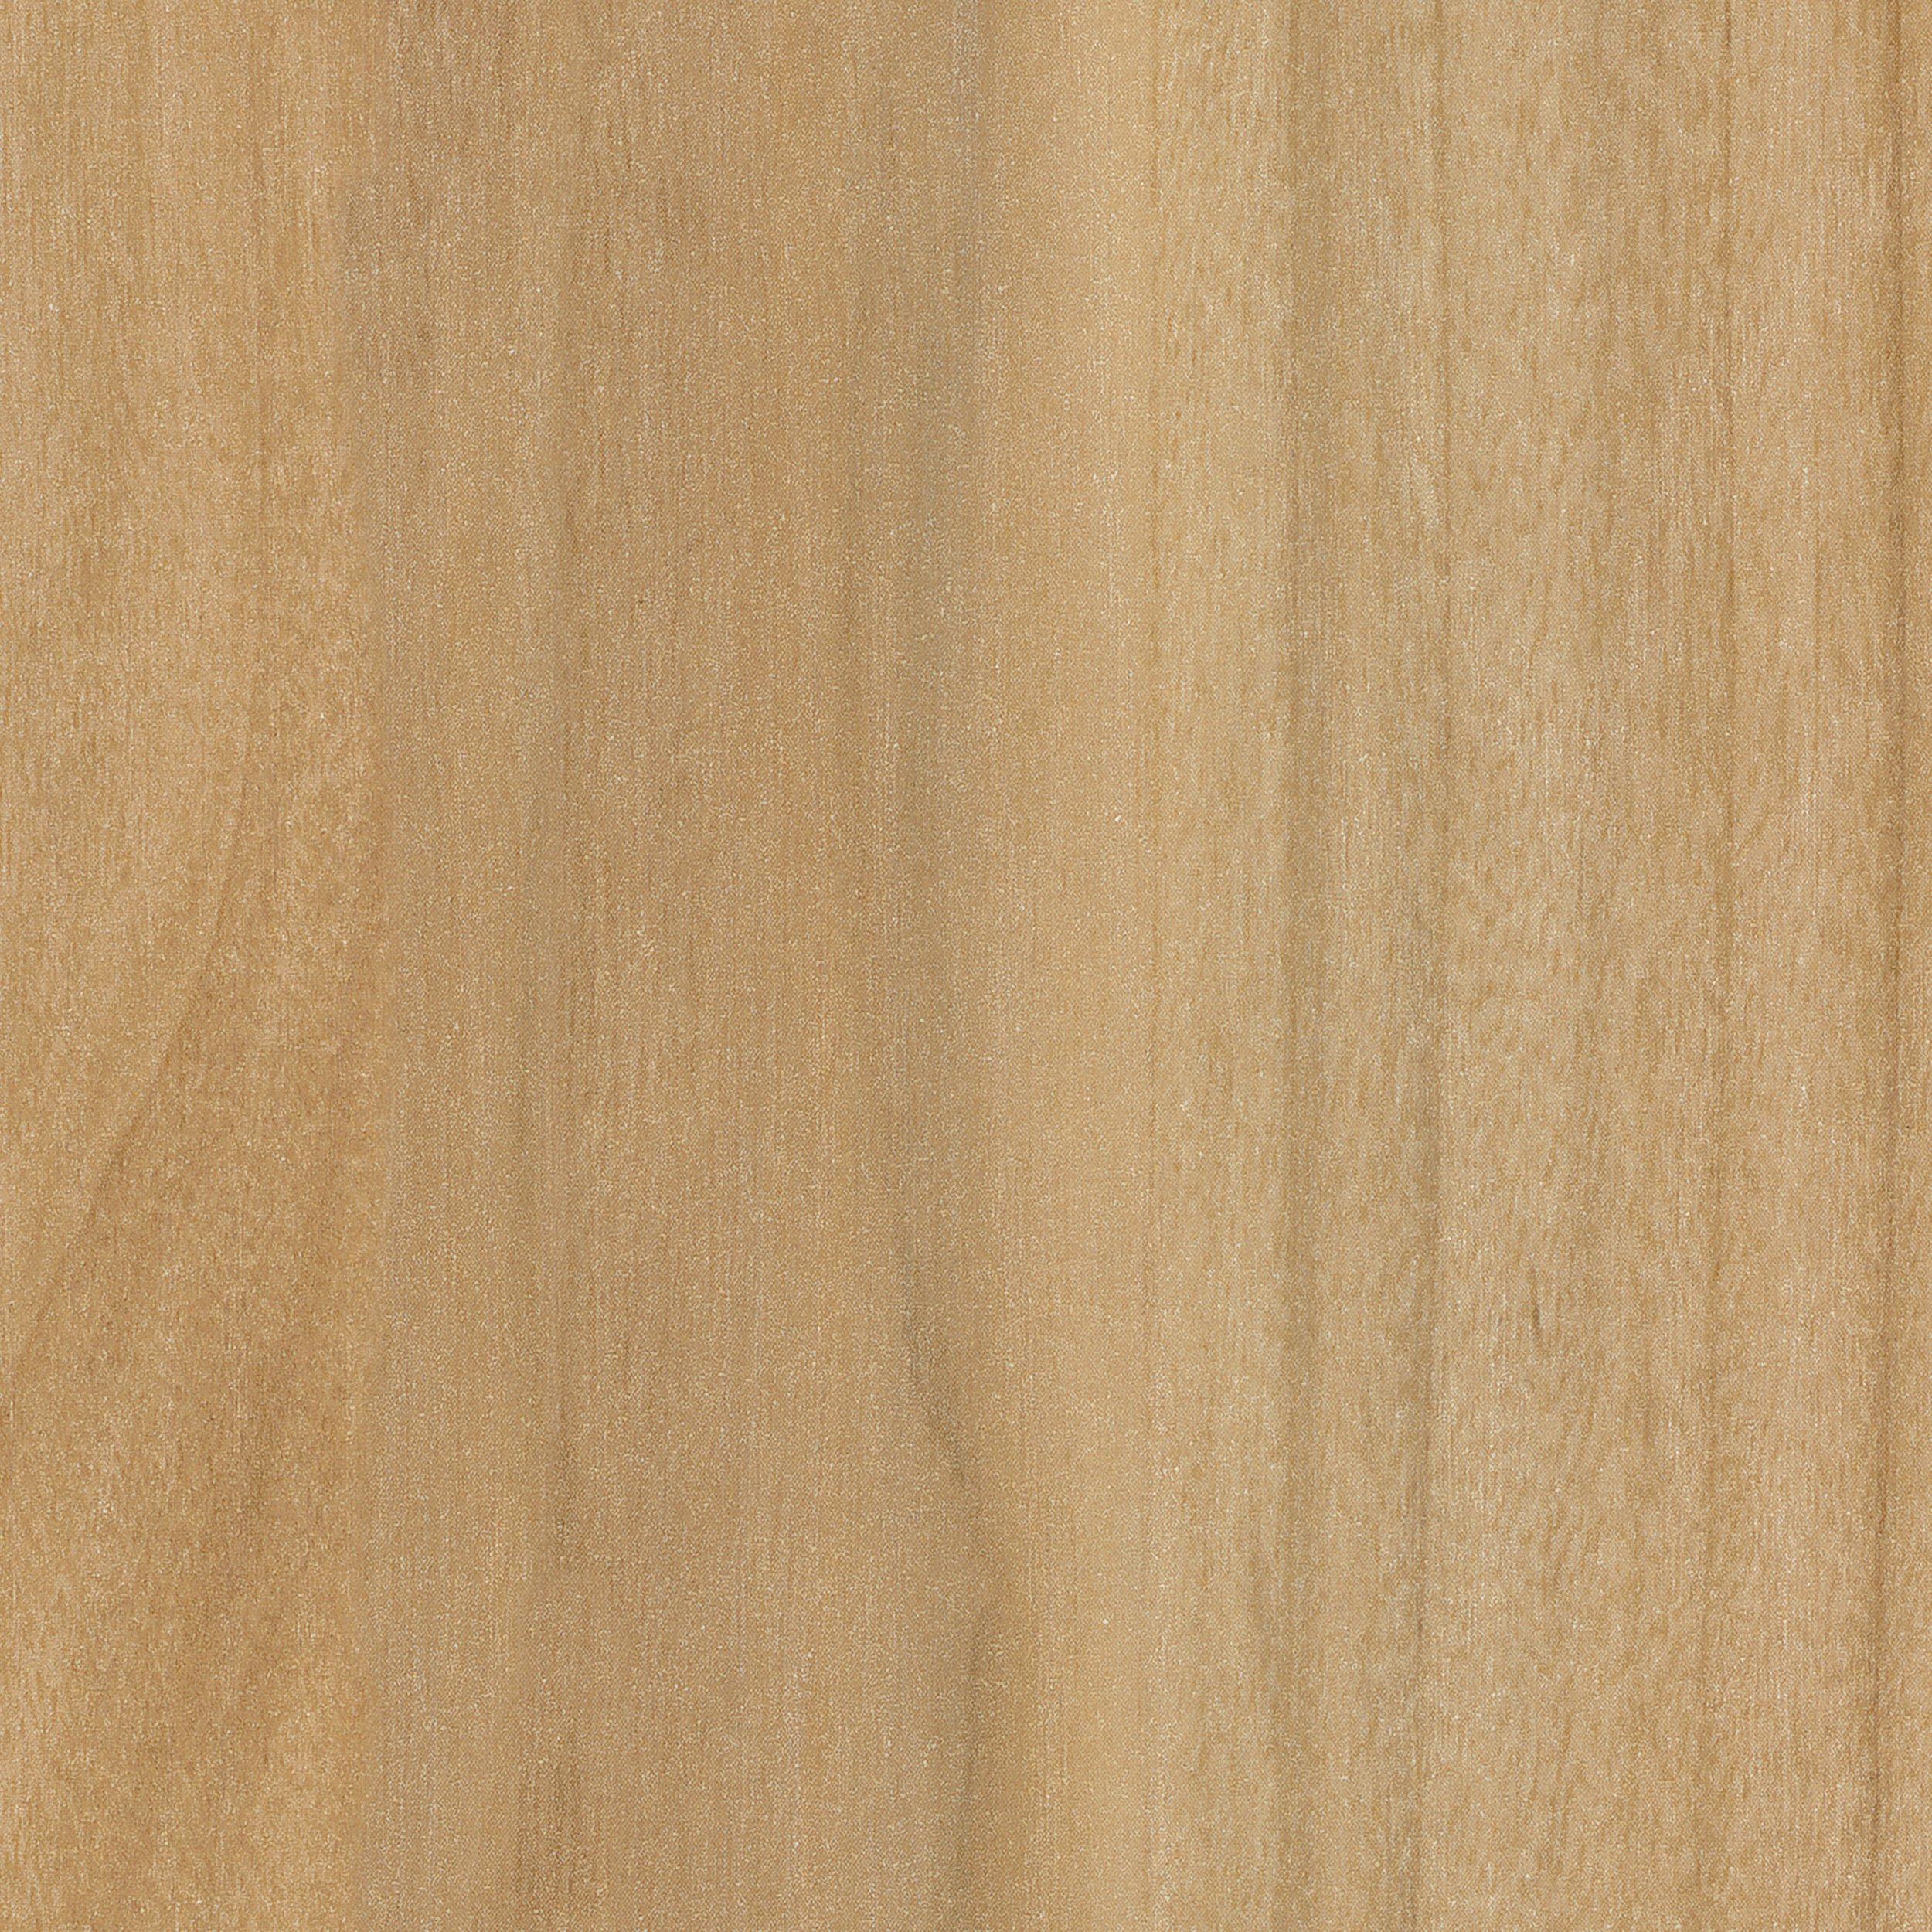 Antioch Acacia 94in. Laminate Overlapping Stair Nose